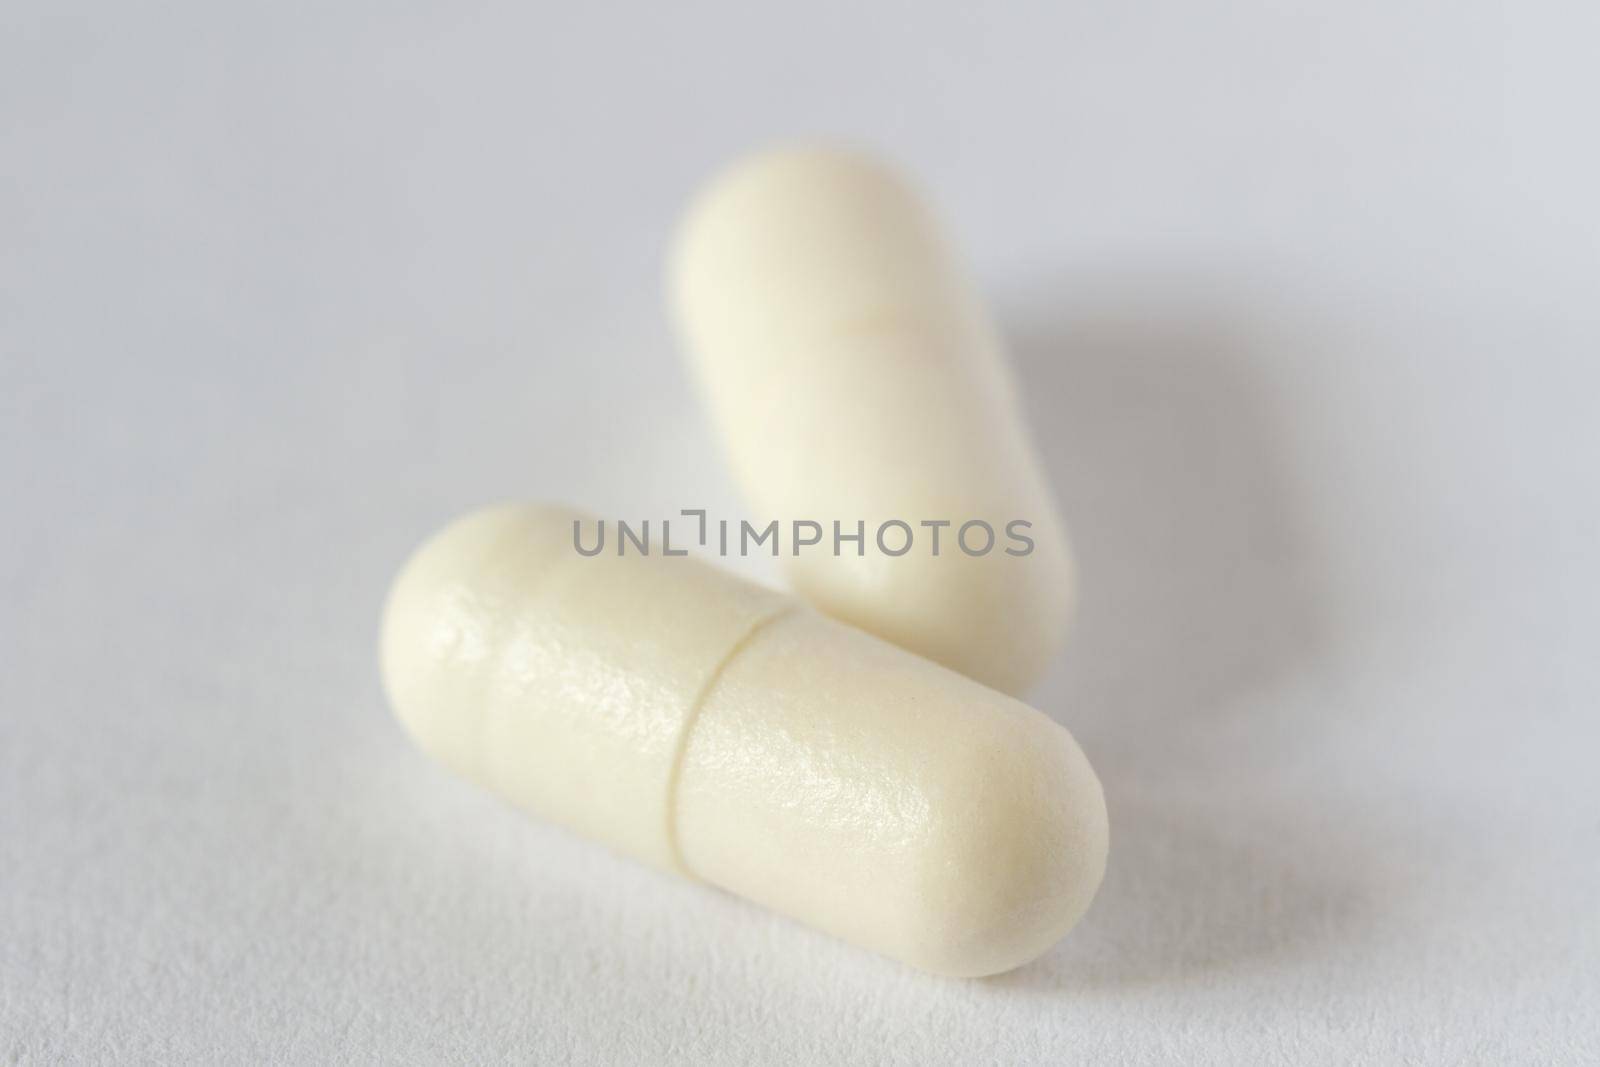 Two white pills capsule on light background. Macro, selective focus by marketlan